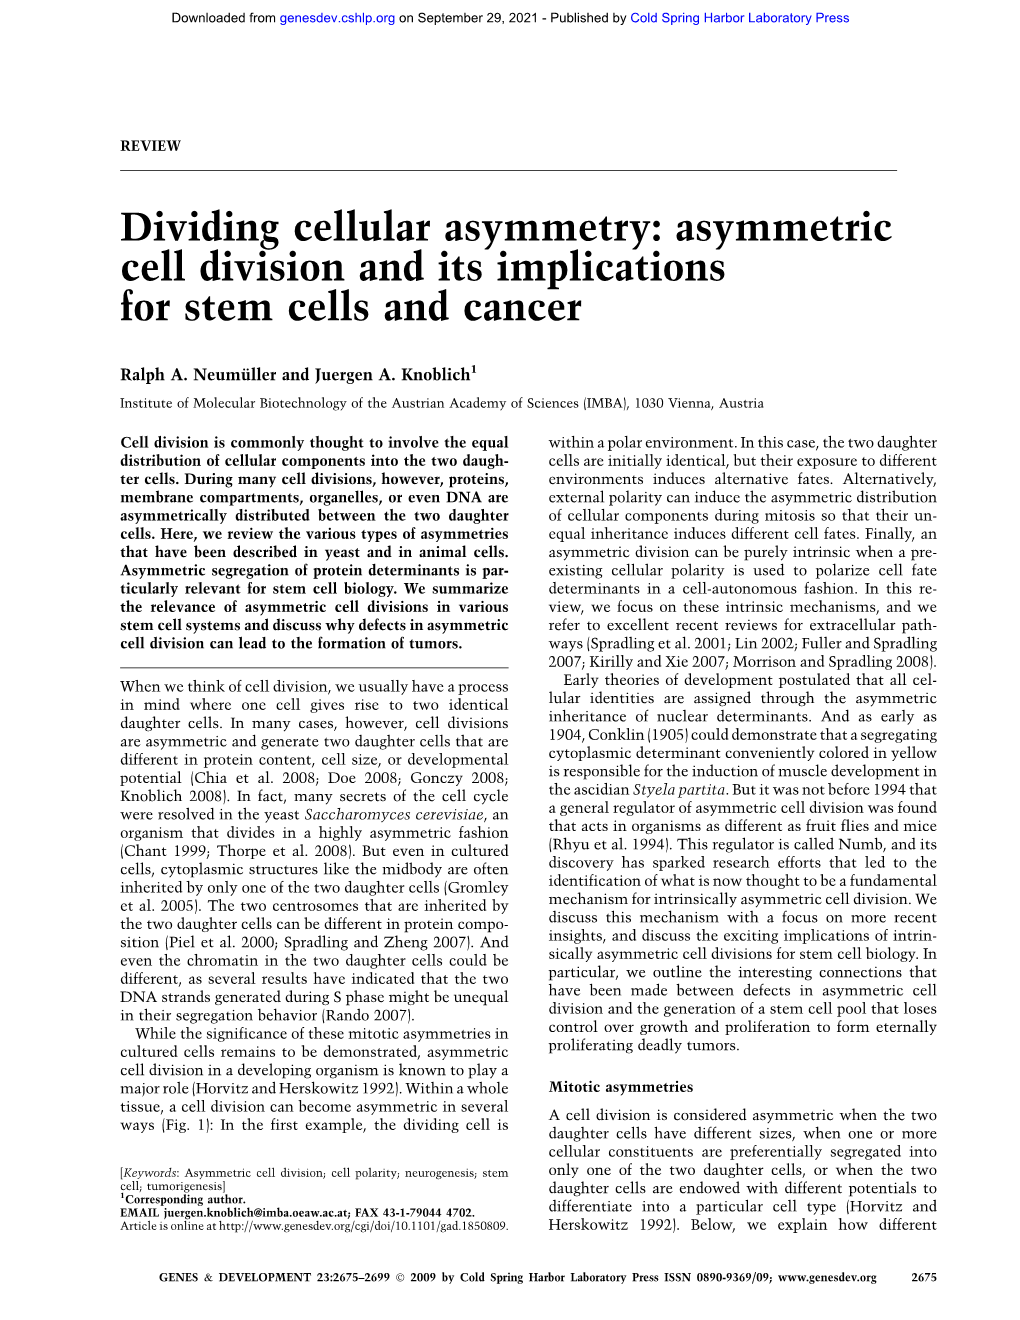 Asymmetric Cell Division and Its Implications for Stem Cells and Cancer